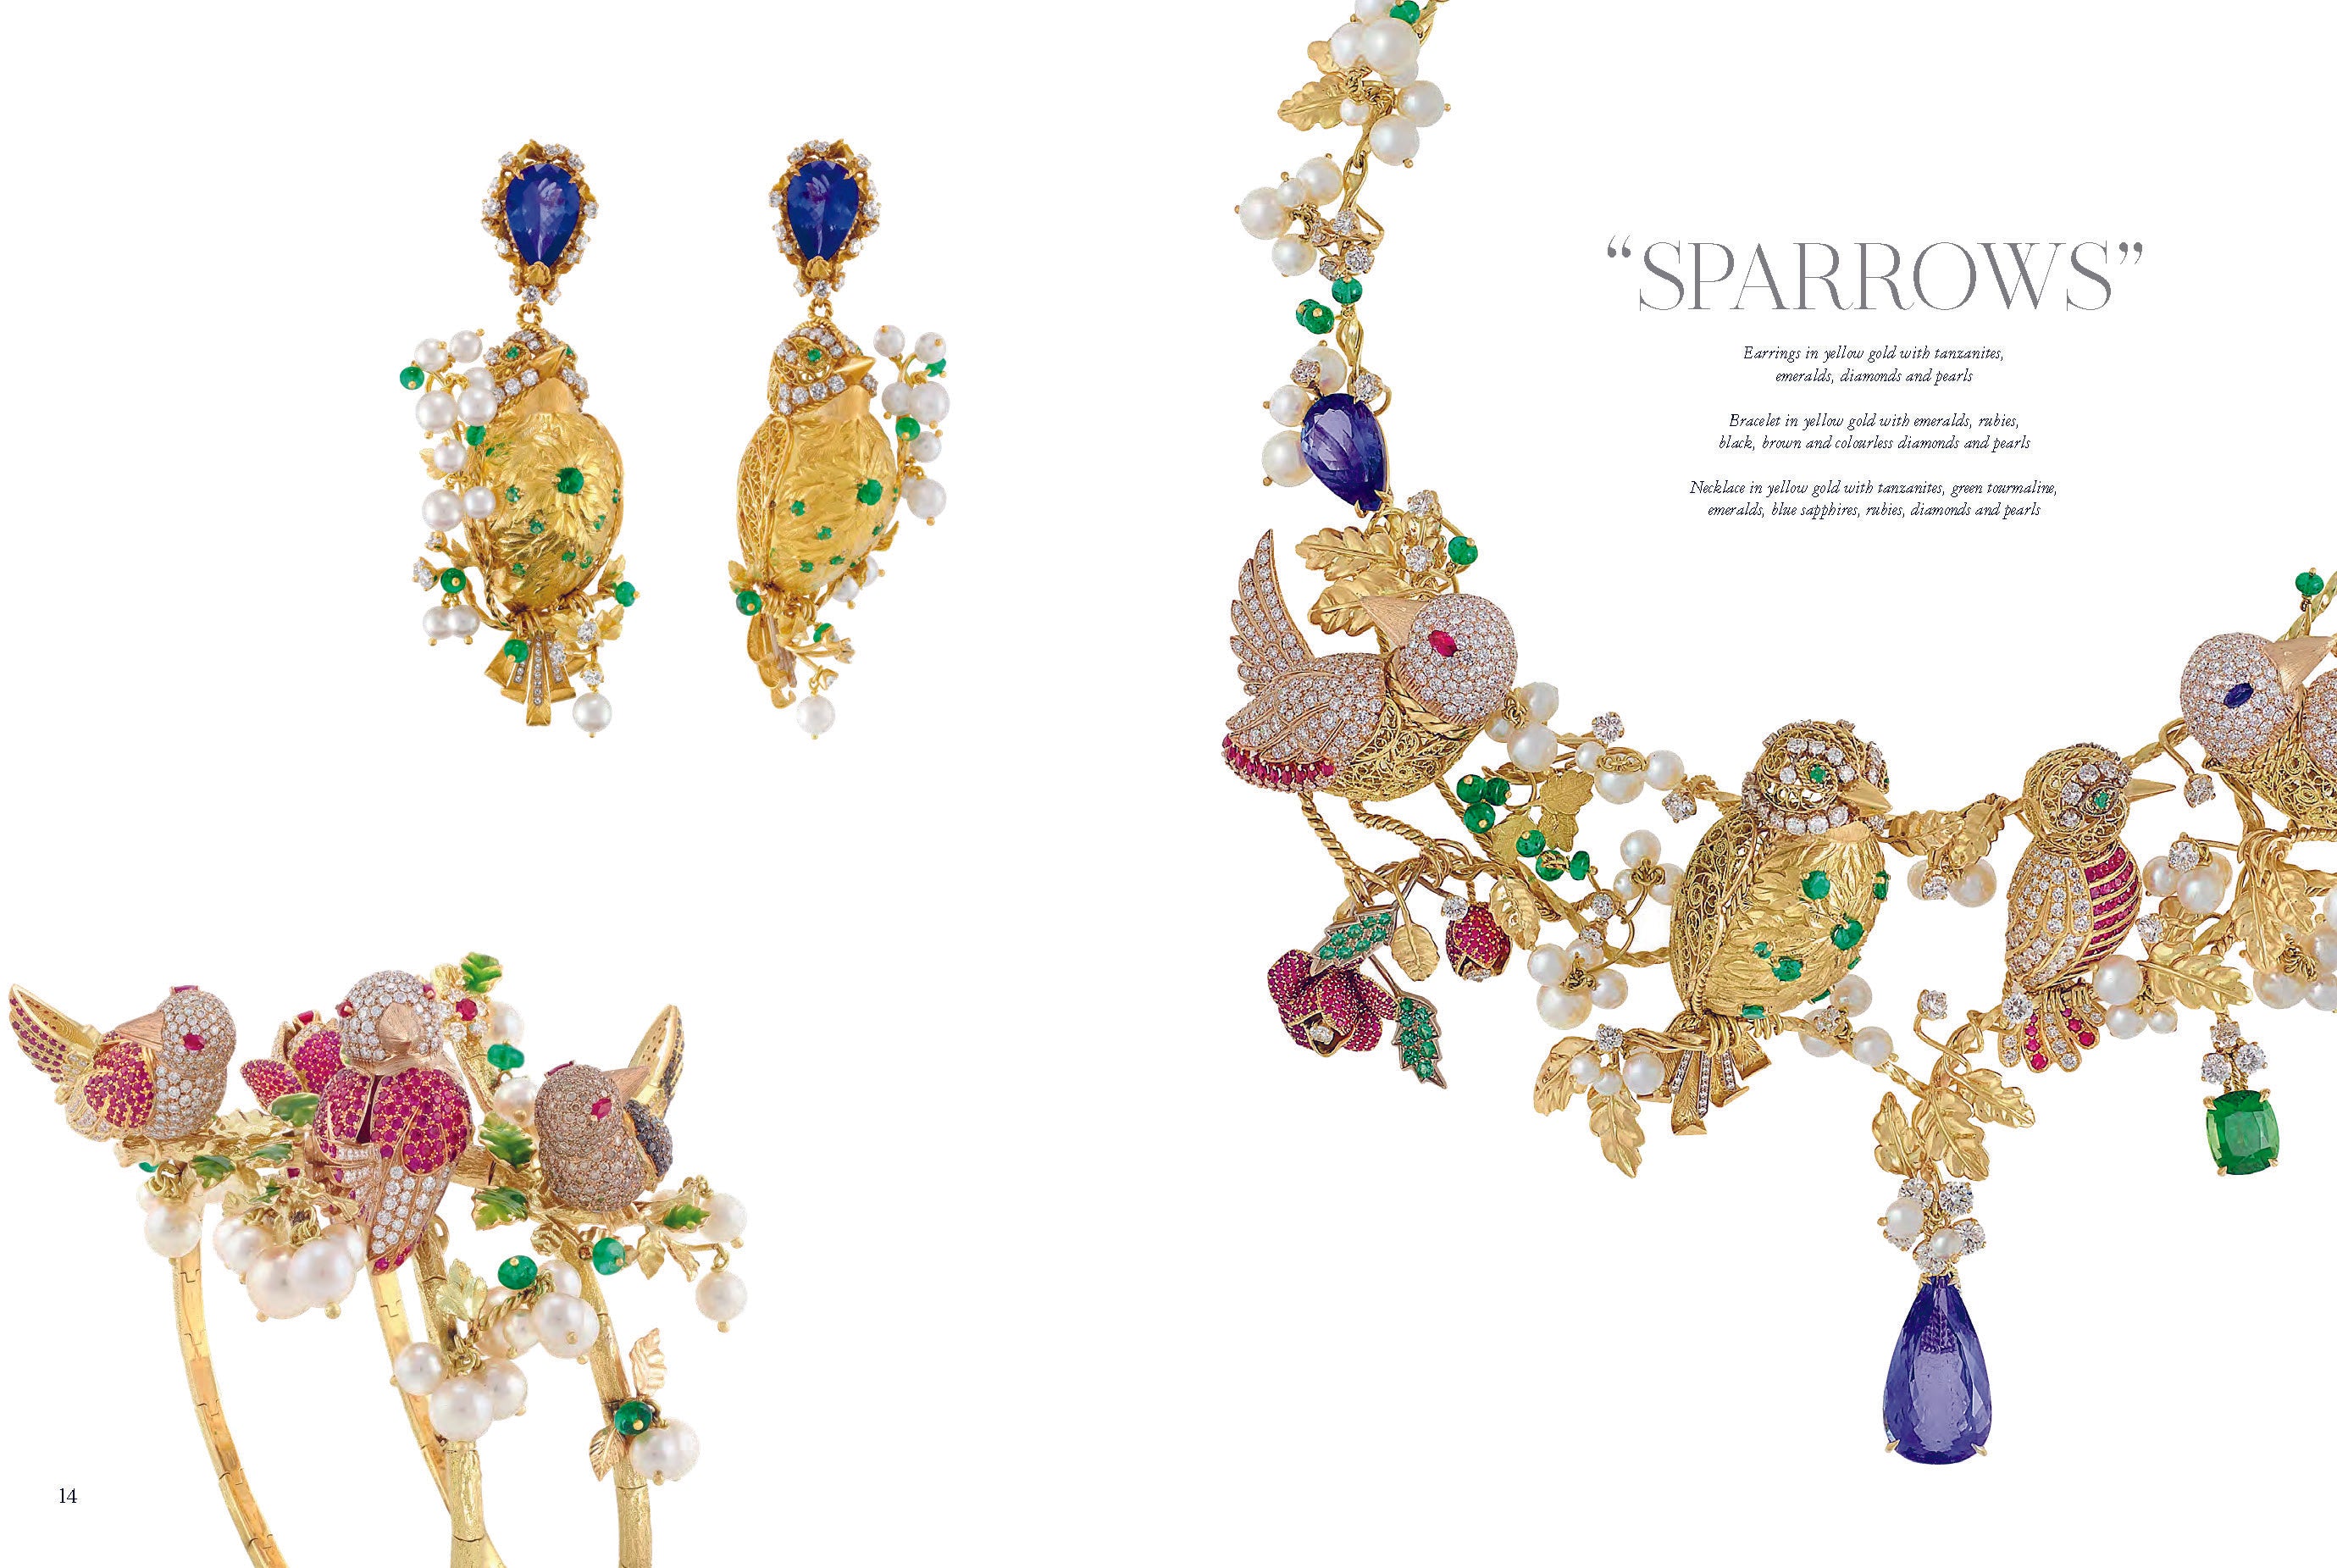 Dolce & Gabbana. Masterpieces of High Jewellery